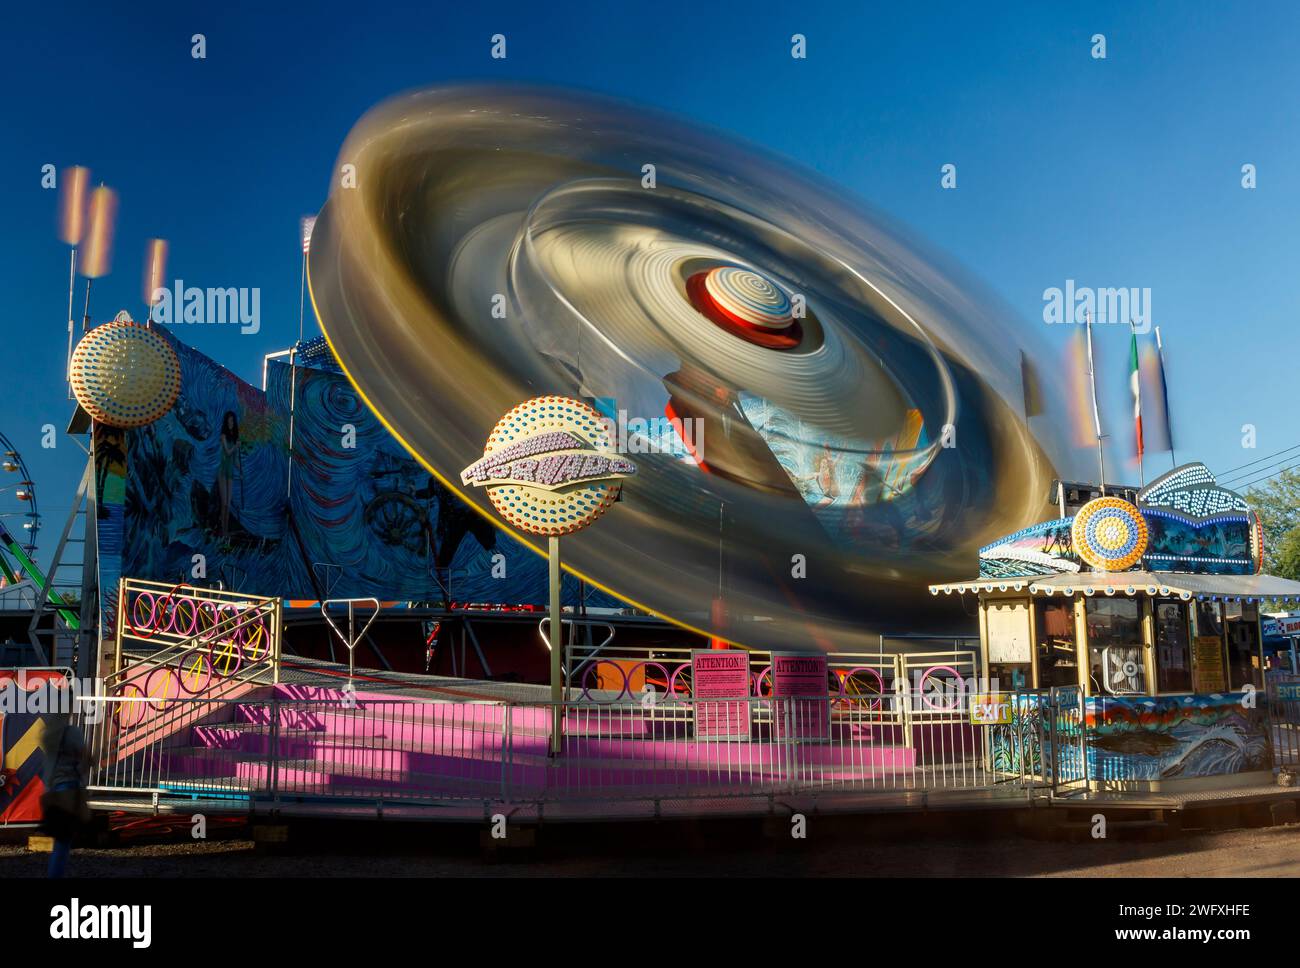 Tornado Carnival Ride with long exposure motion blur. Canfield Fair, Mahoning County Fair, Canfield, Youngstown, Ohio, USA. Stock Photo